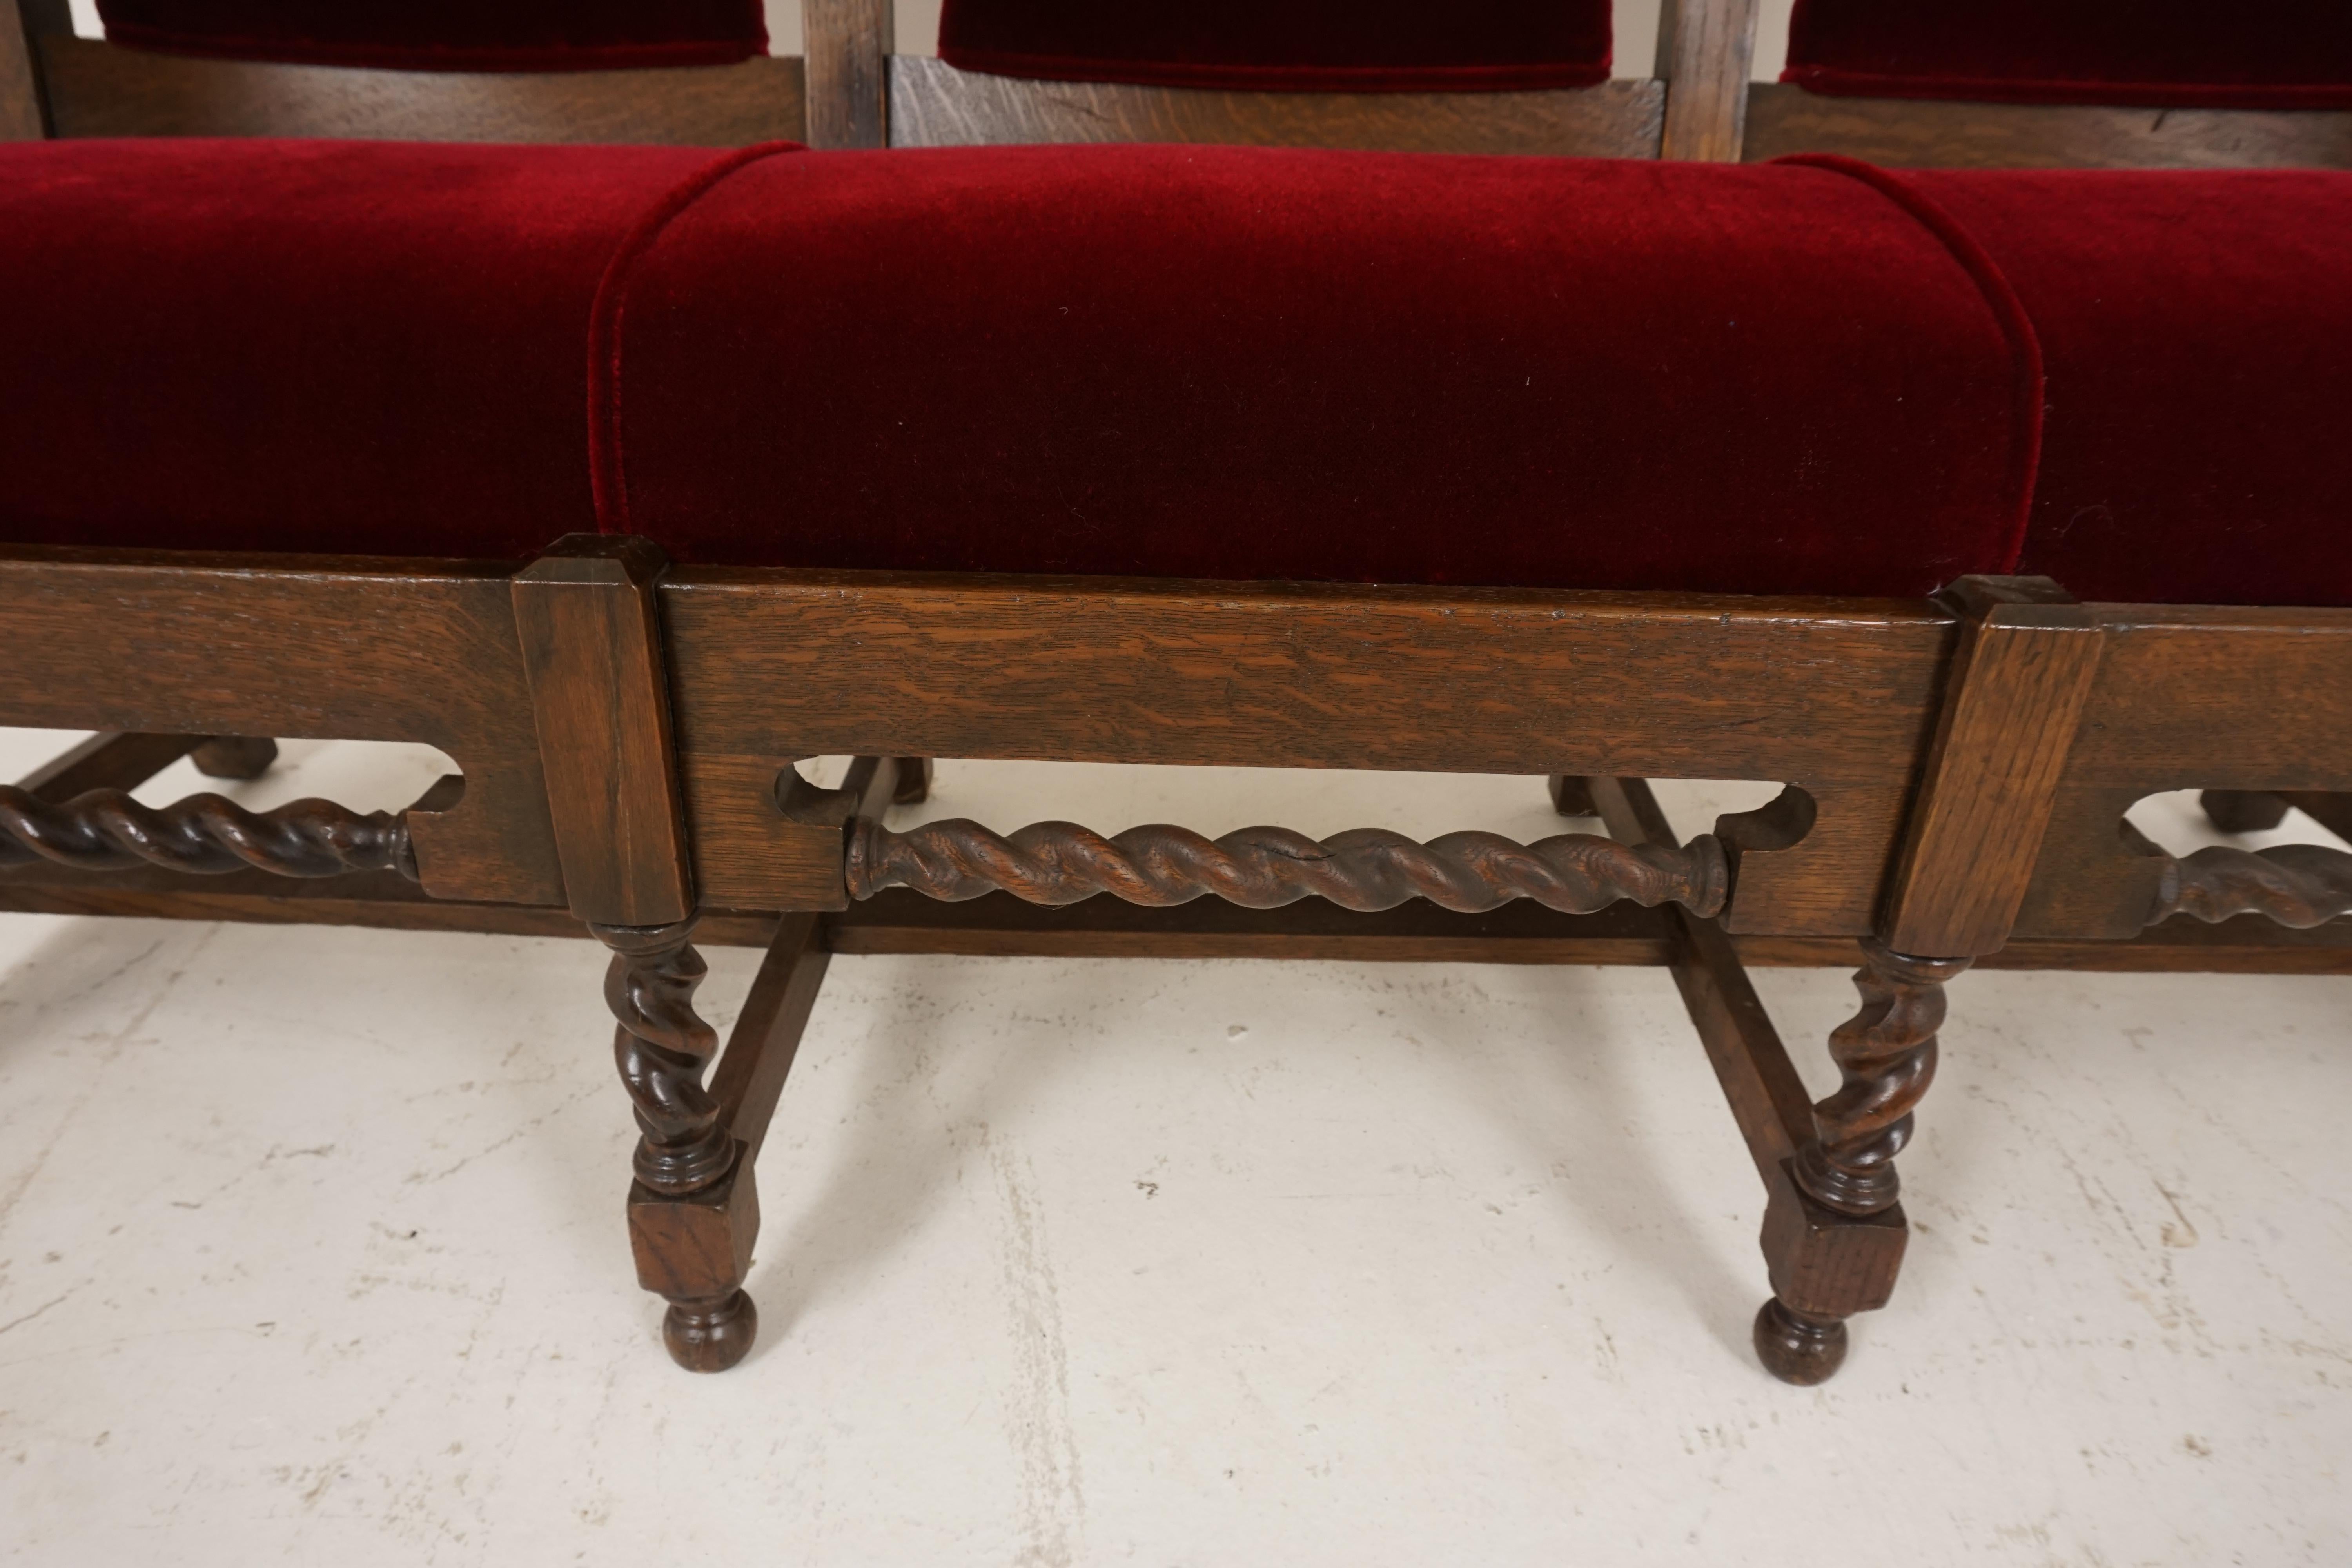 Hand-Crafted Antique Oak Sofa, Jacobean Style Barley Twist Three-Seat Settee, Chaises, 1890s